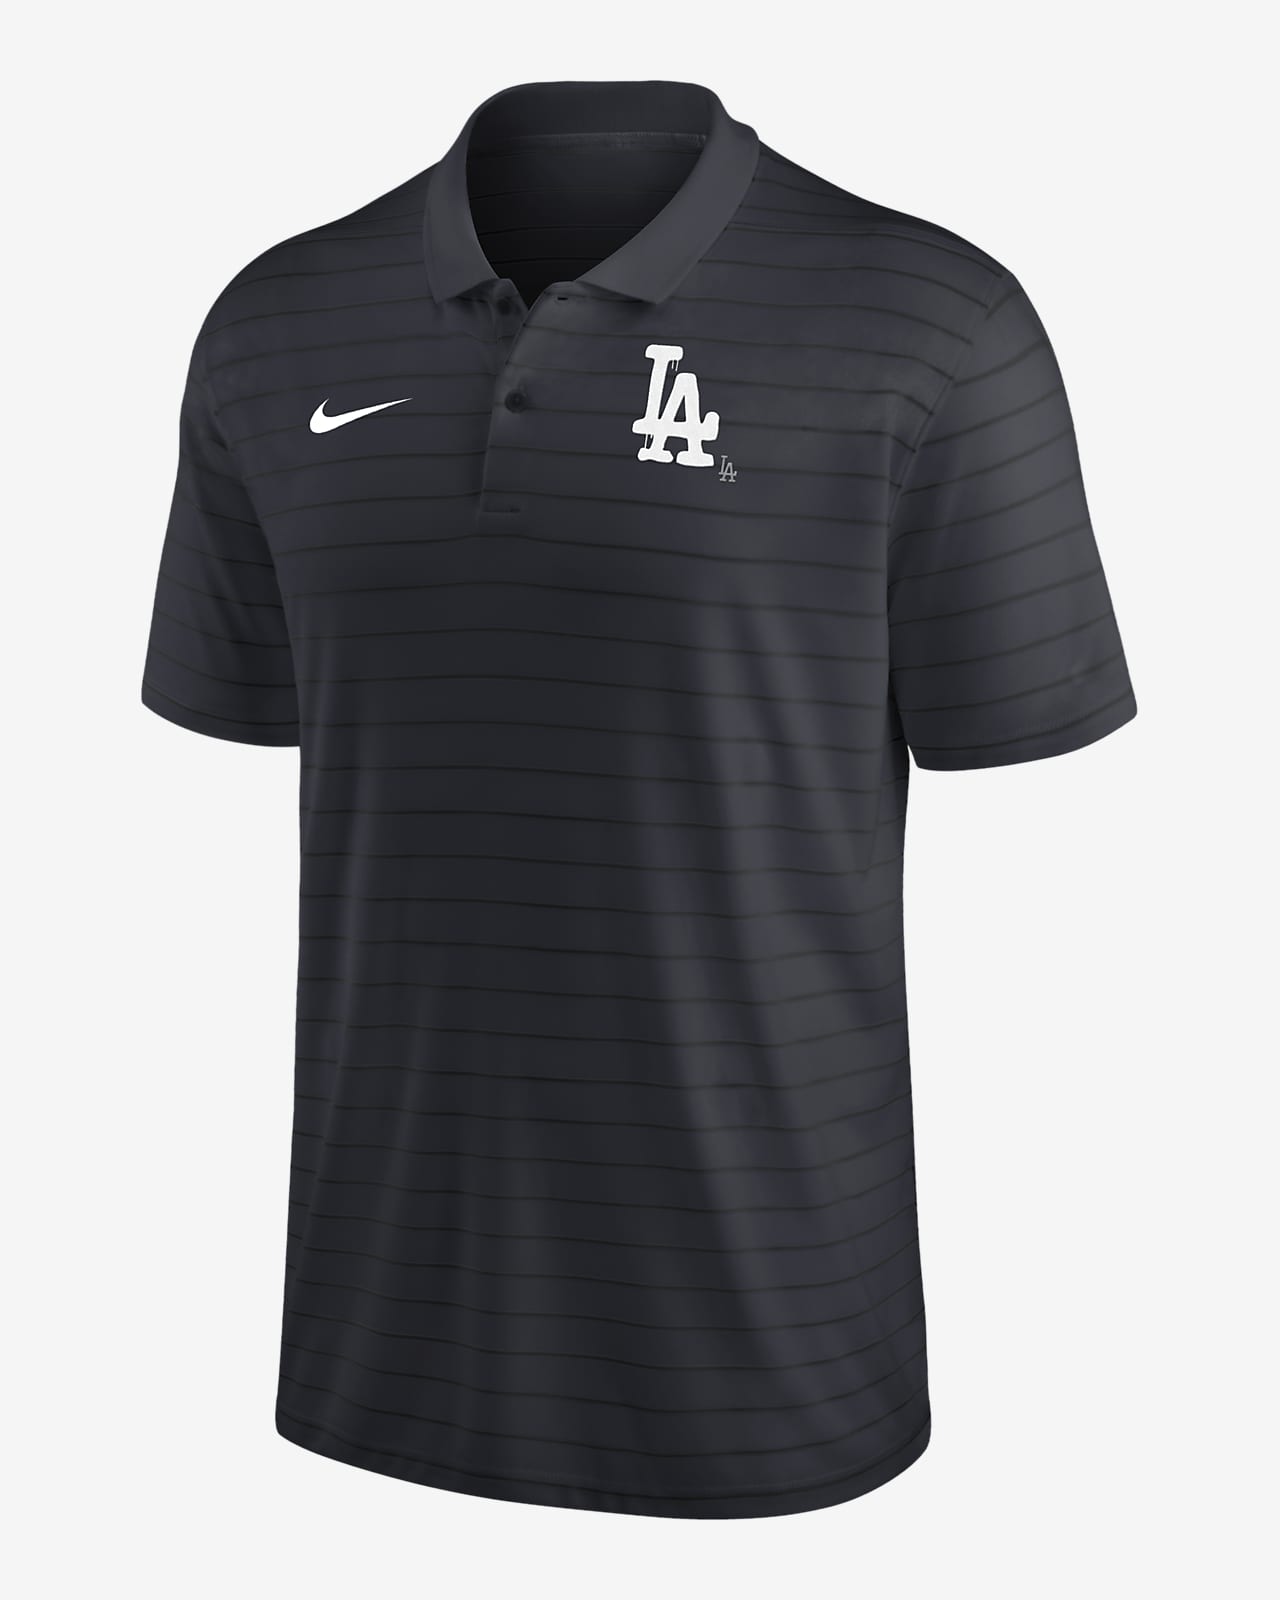 Nike Dri-FIT City Connect Victory (MLB Los Angeles Dodgers) Men's Polo.